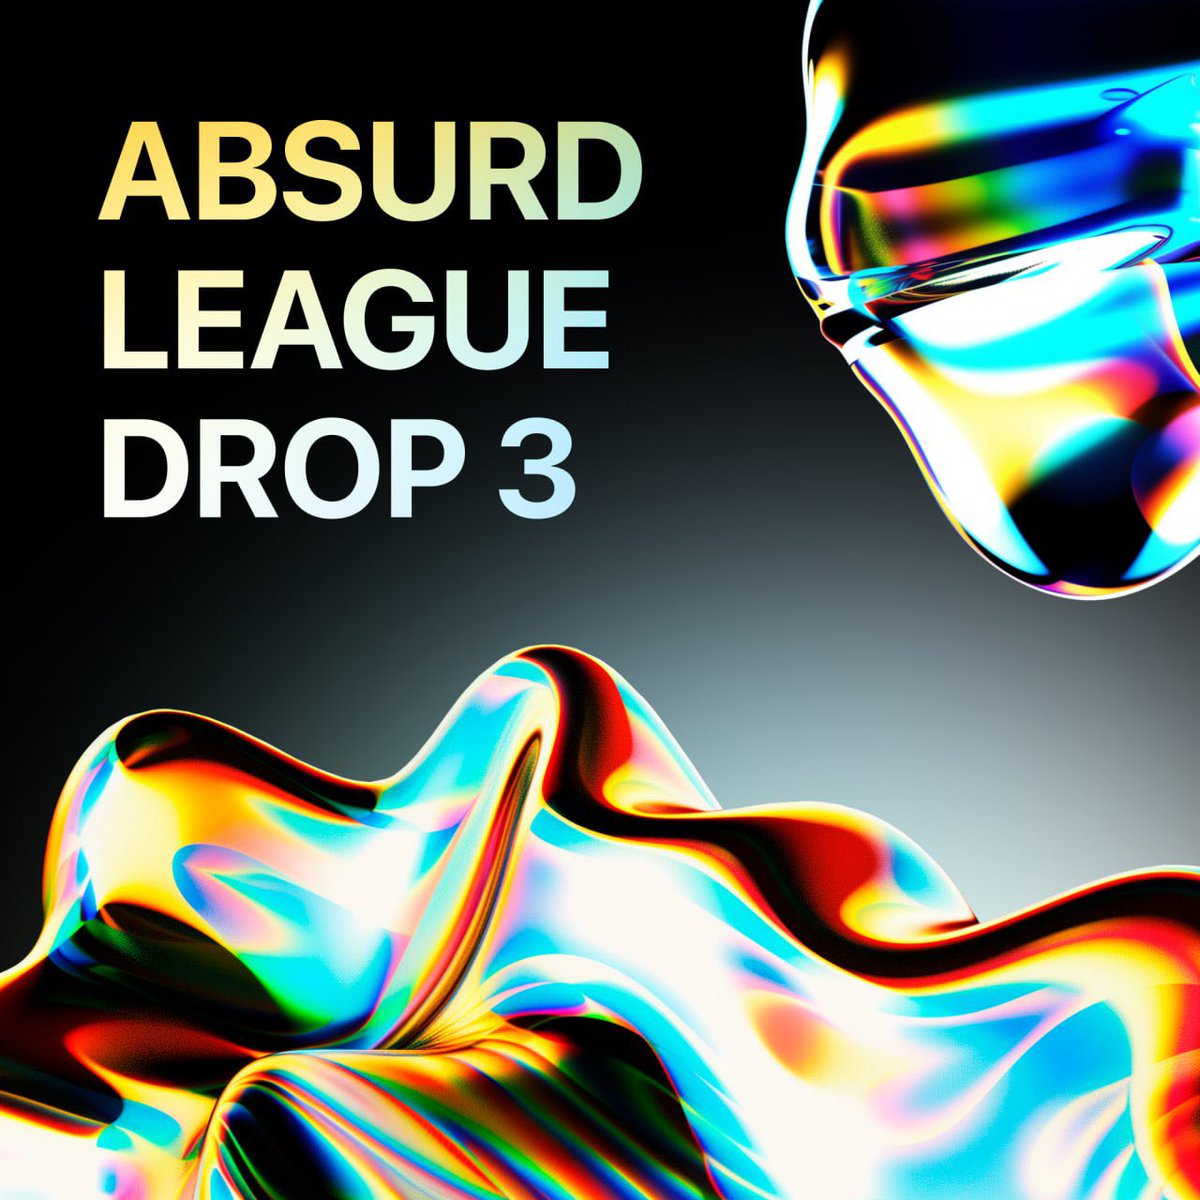 🎠The 3rd season of Absurd League is here! 🎠 Prizes are bigger! Vibes are more absurd! Over $30,000 are up for grabs 🪩 To qualify for the first raffle make sure to join before May 15! Read full info here: t.me/getgems/533